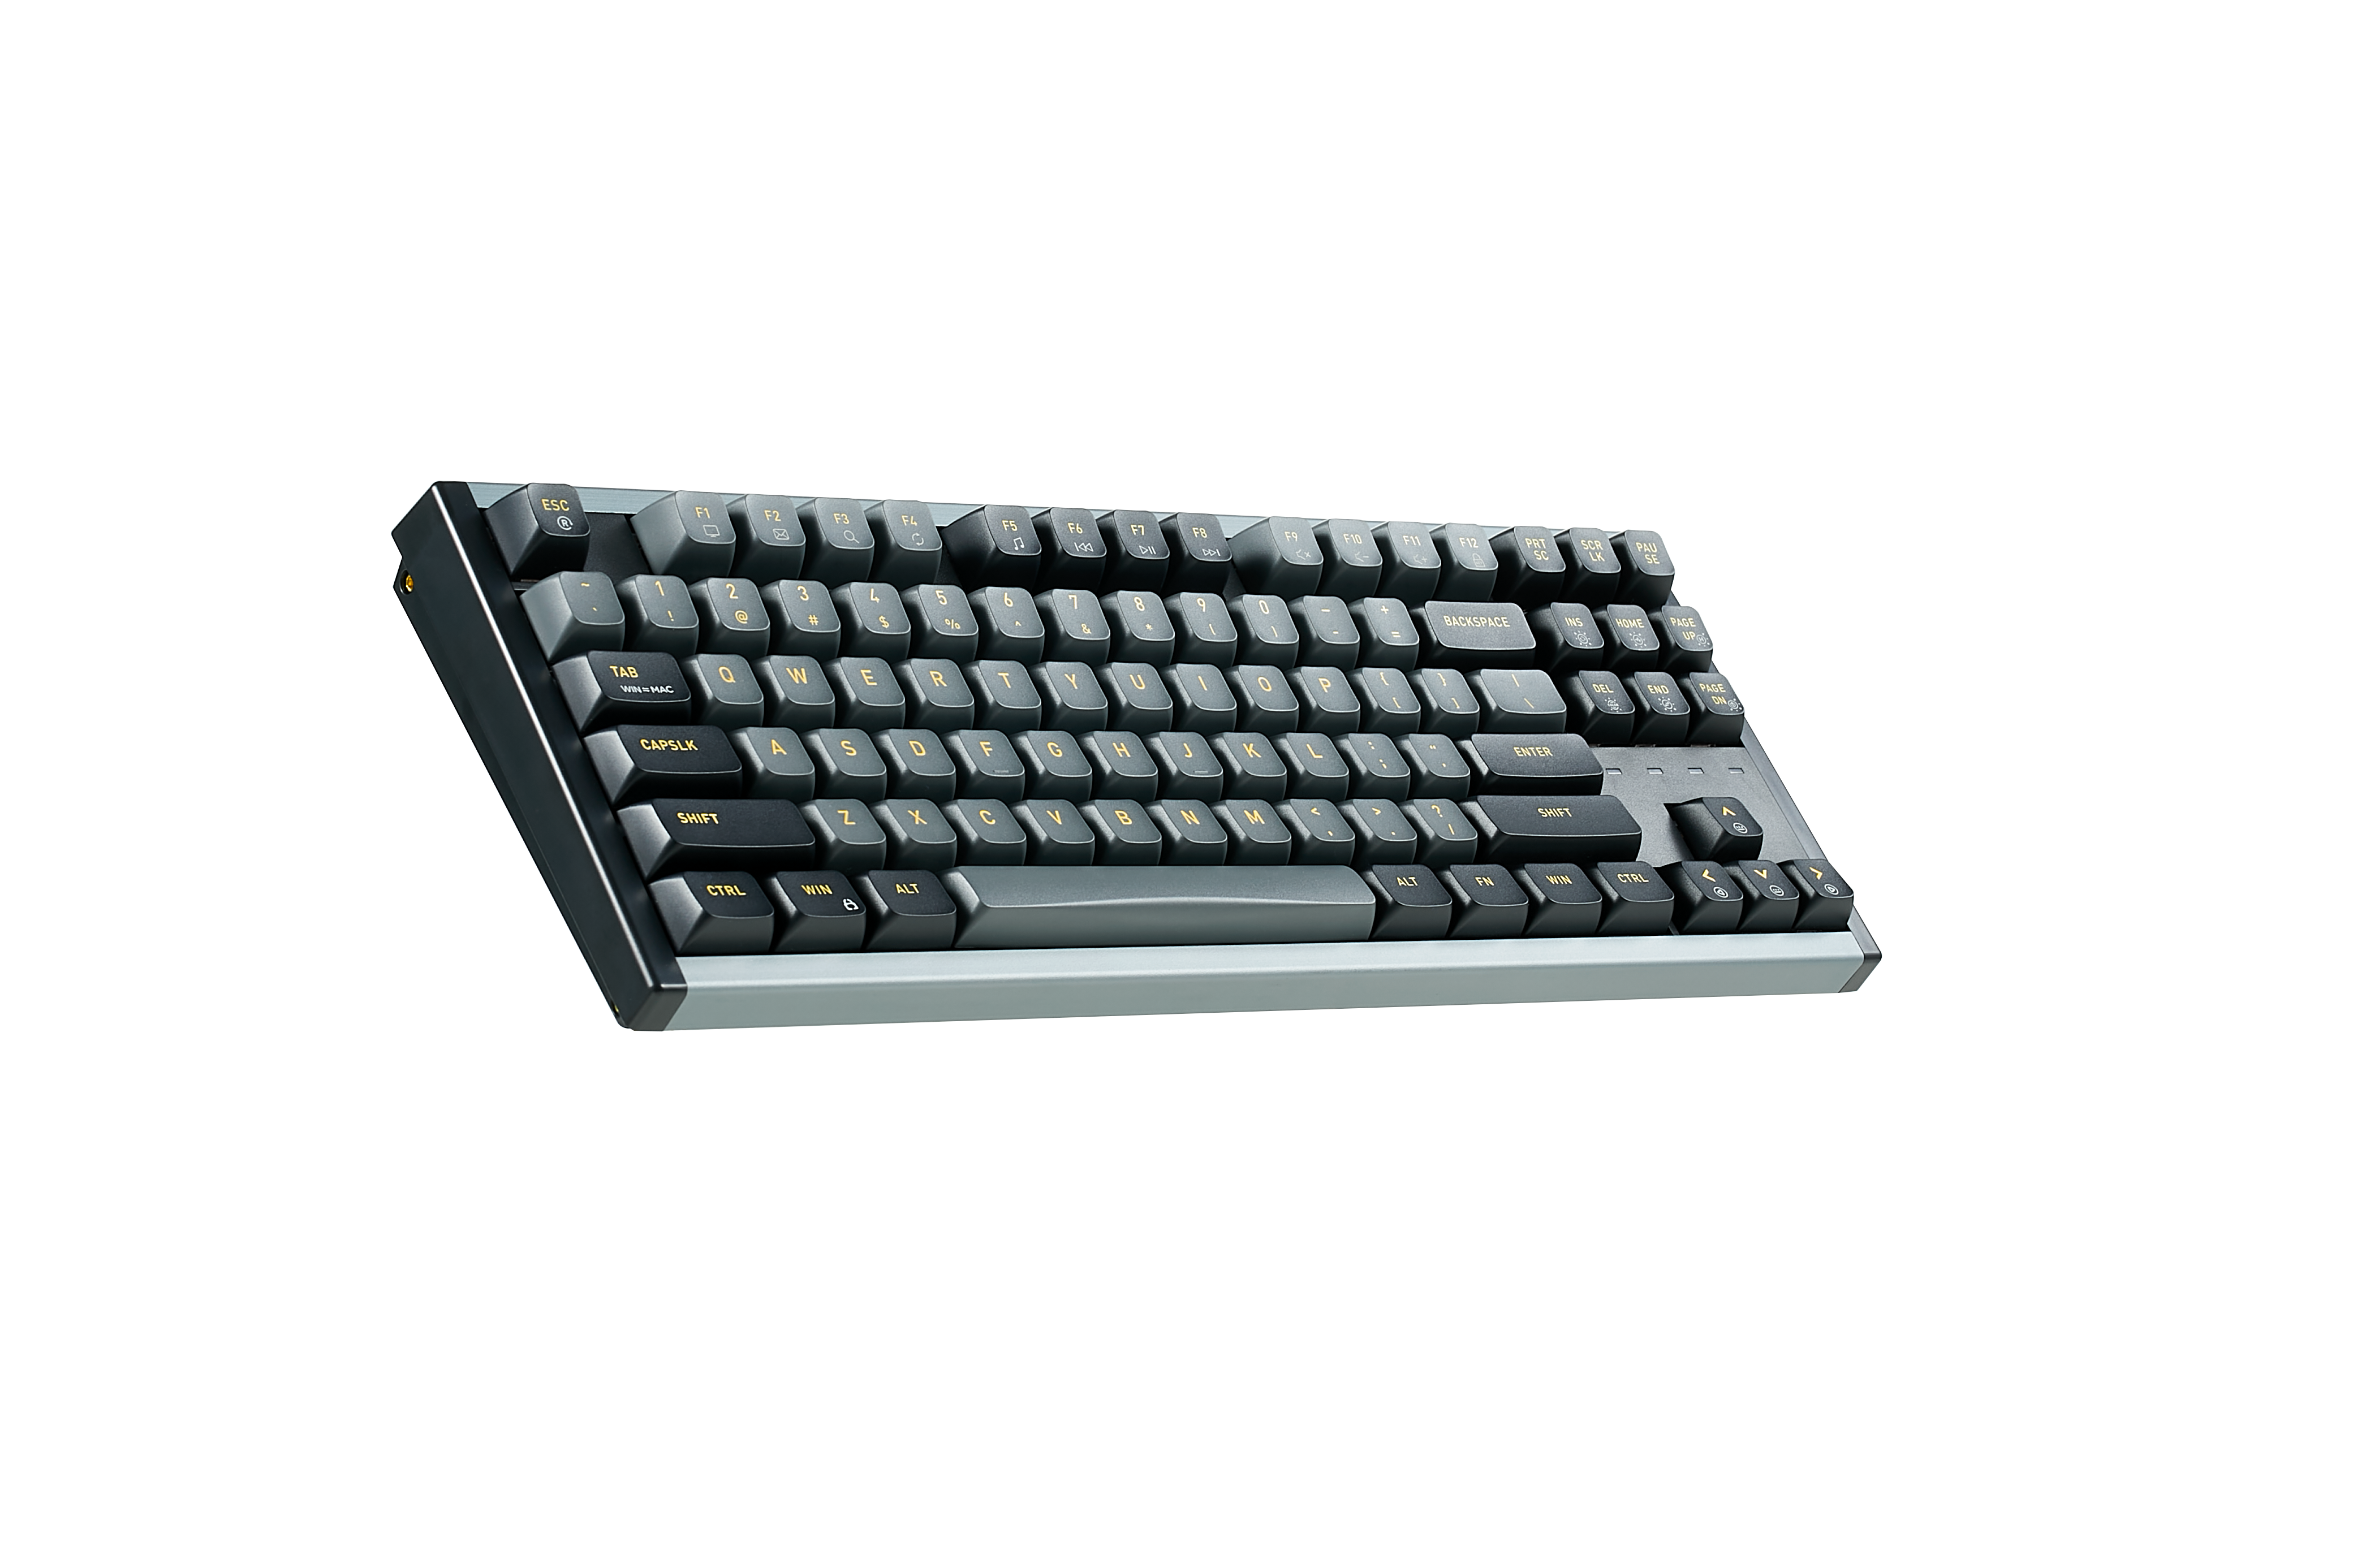 Hexgears I3 Mechanical Keyboard, 75% Gaming Keyboard 87 Keys with Kailh Hot Swappable Switch